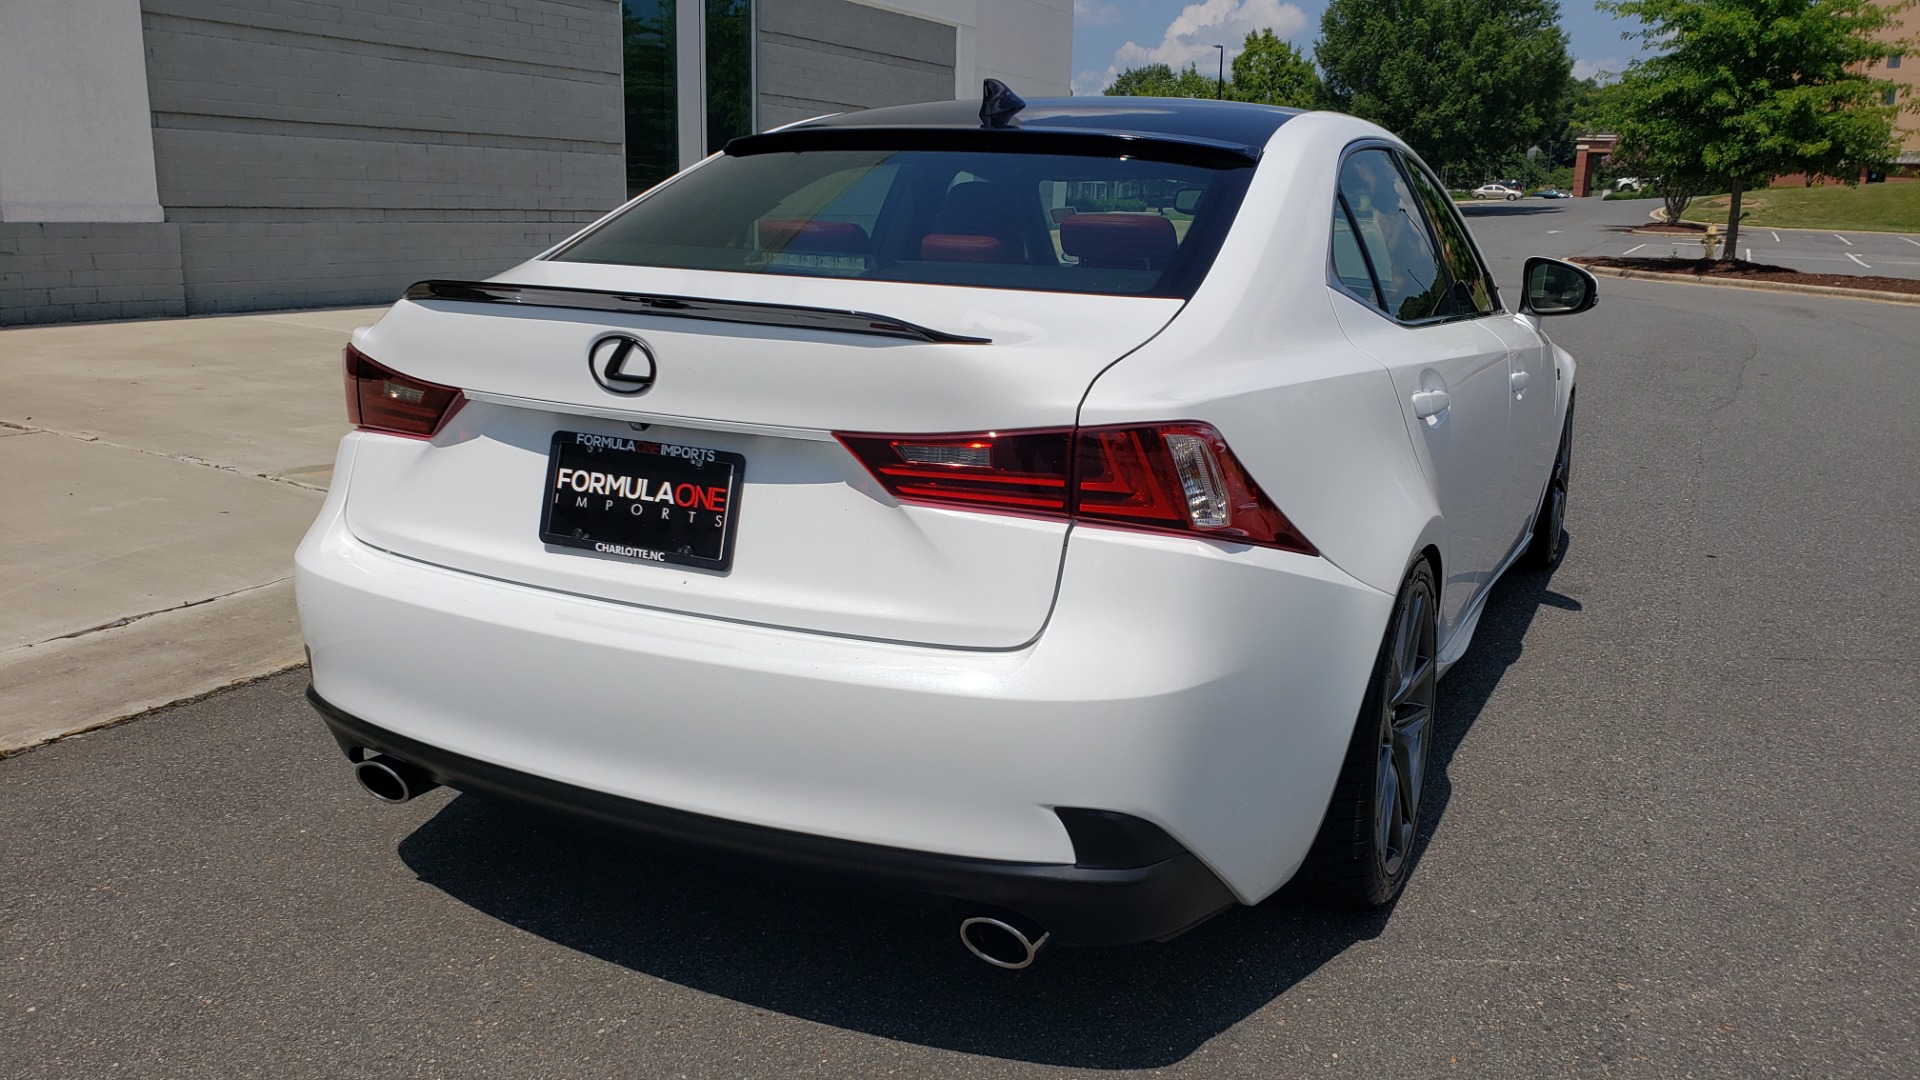 Used 2014 Lexus IS 250 F-SPORT SEDAN / BLIND SPOT MONITOR / REARVIEW / 18IN WHEELS for sale Sold at Formula Imports in Charlotte NC 28227 3